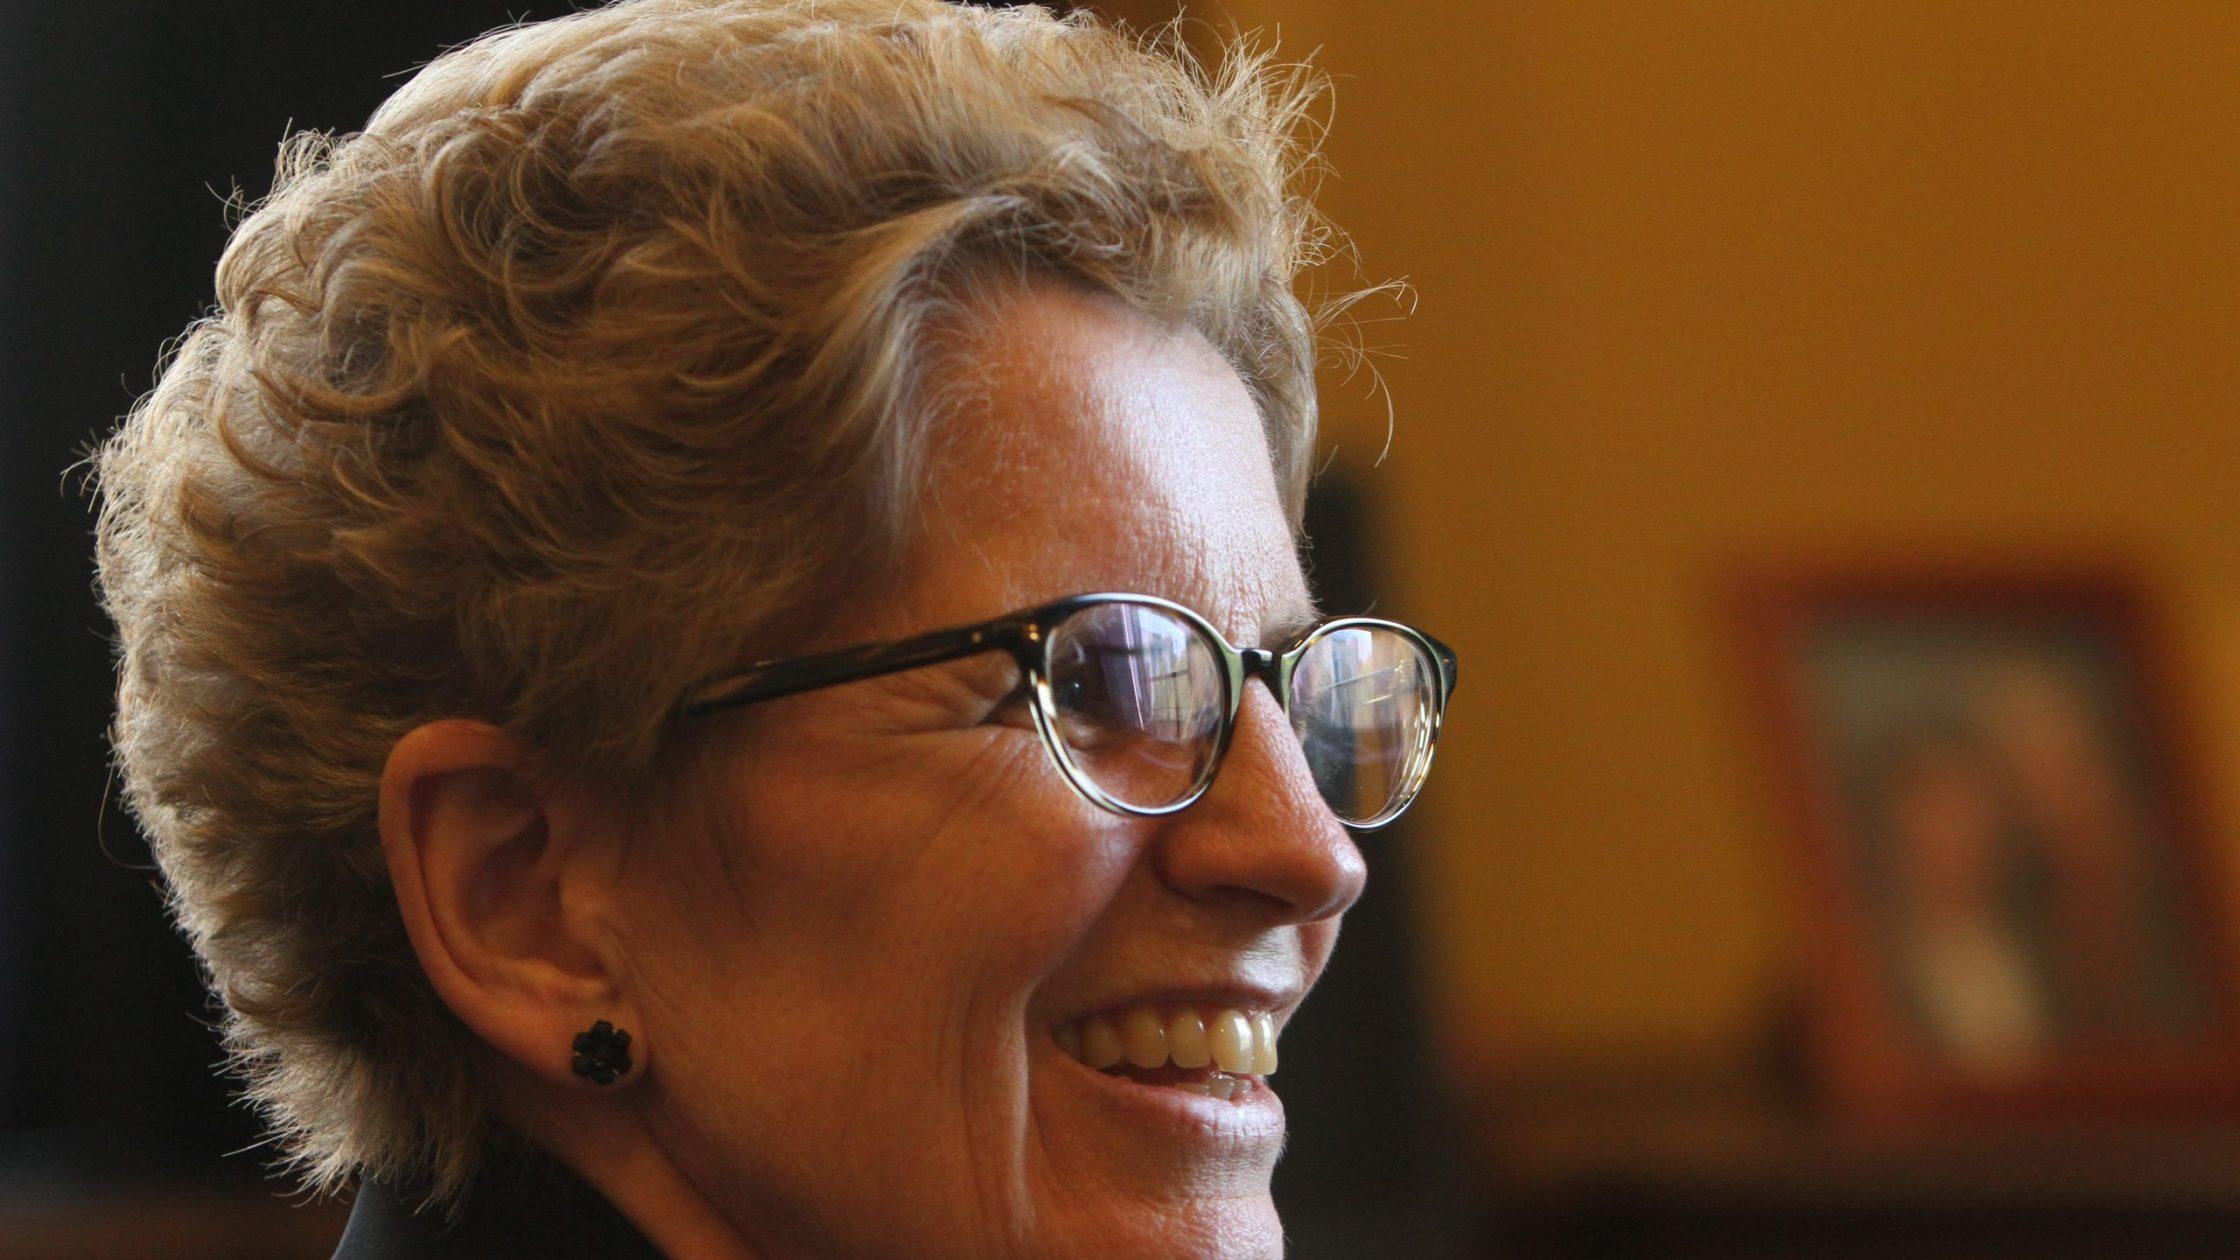 White woman with glasses in profile, smiling